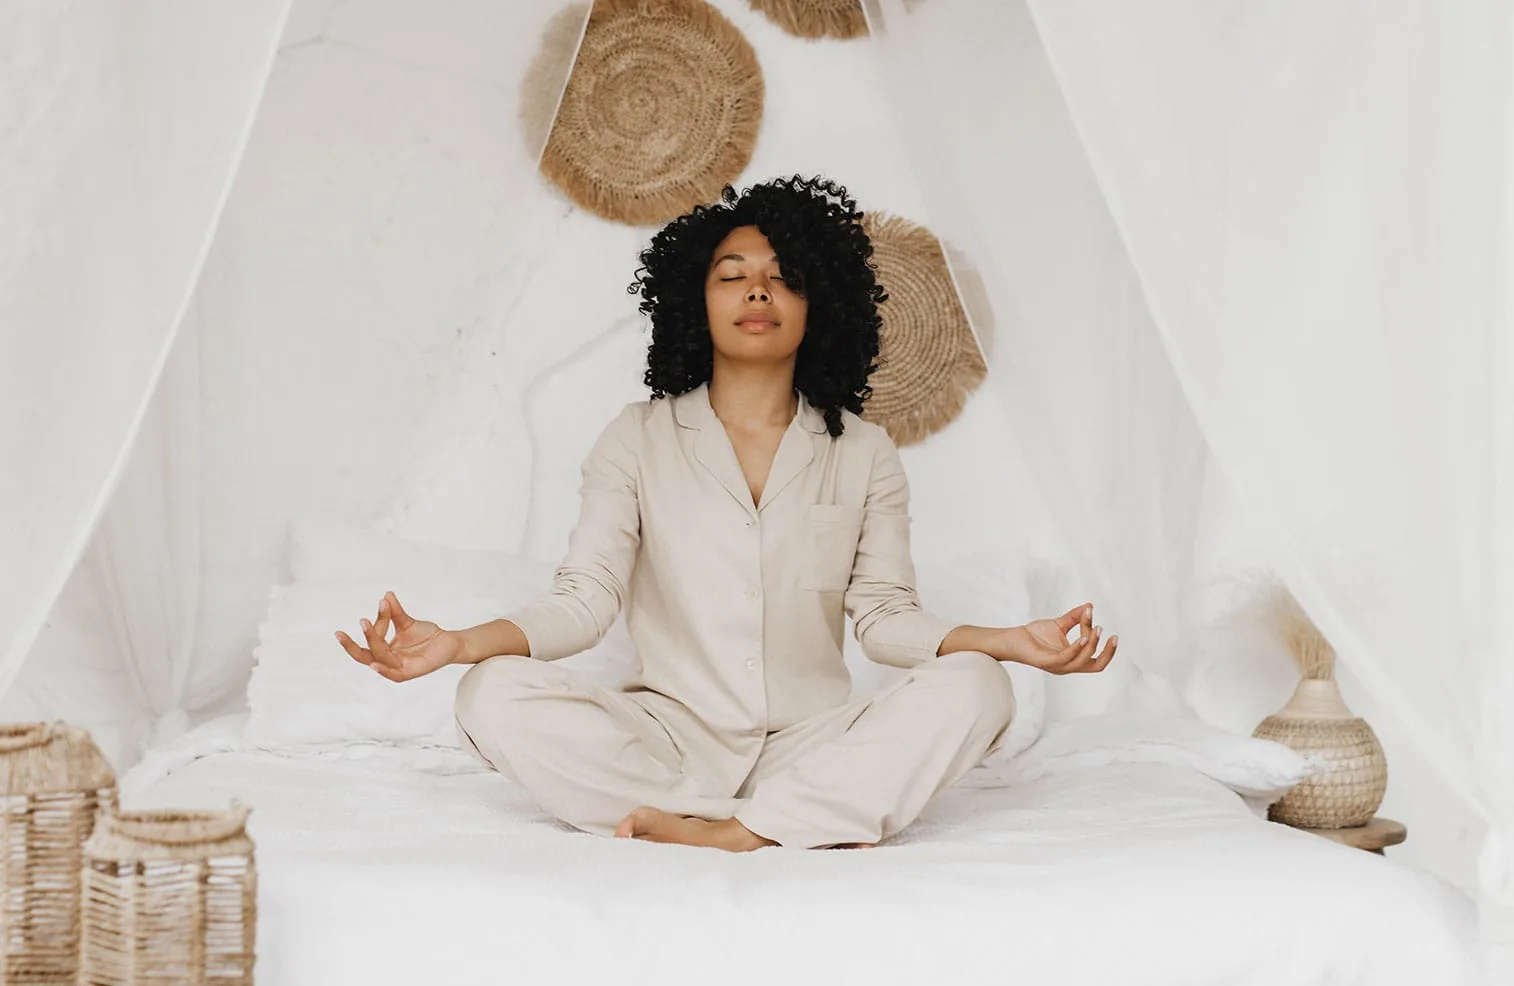 When your mind is racing and your anxiety is on the rise, here are 11 simple things you can do now to calm your mind.